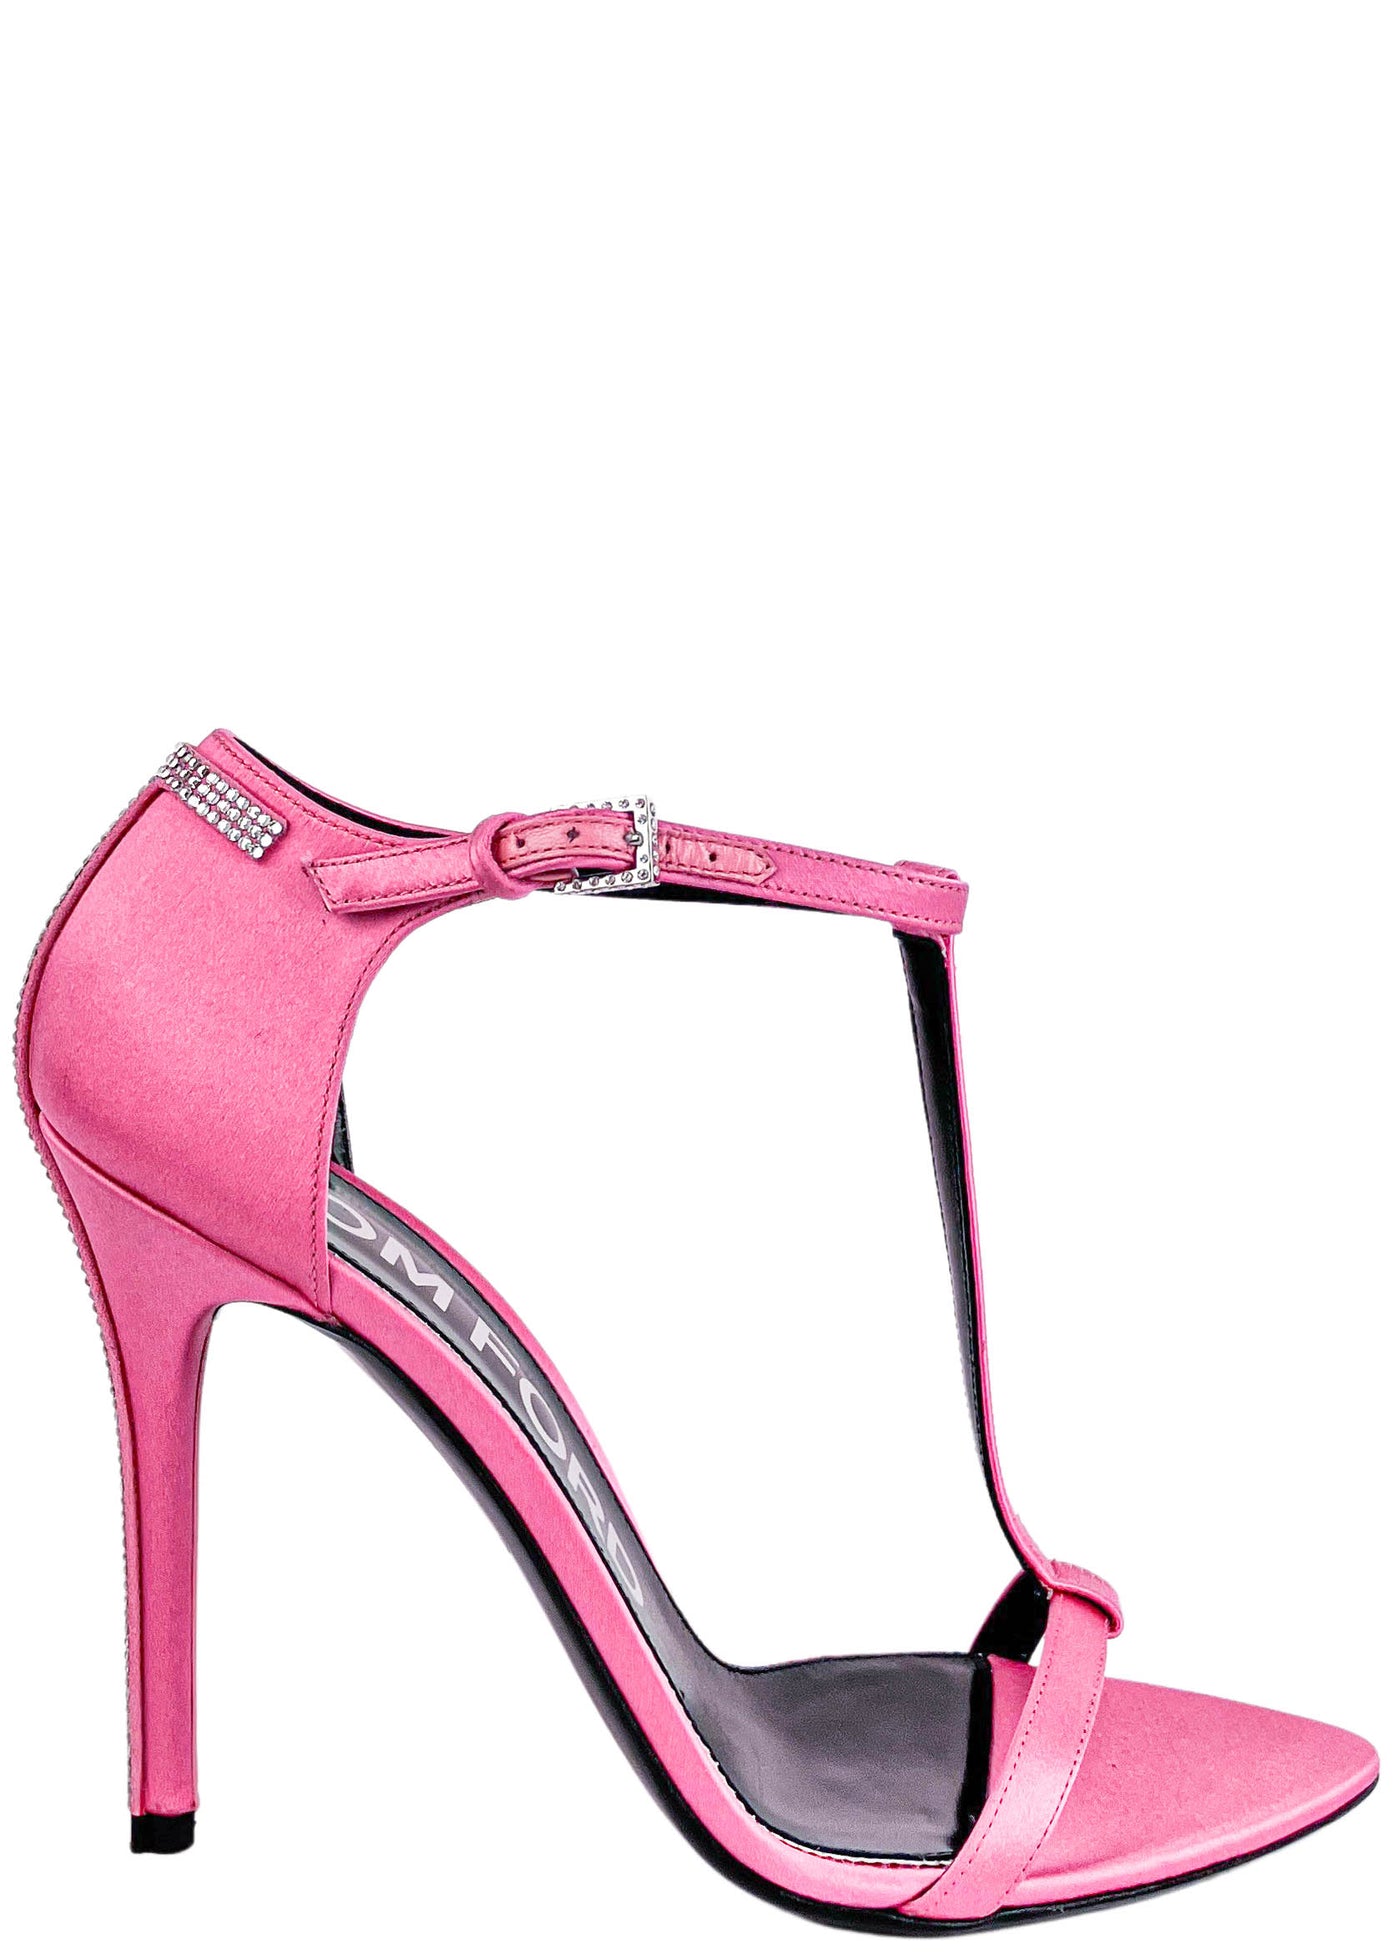 Tom Ford Iconic T Crystal Satin Sandals in Pink - Discounts on Tom Ford at UAL